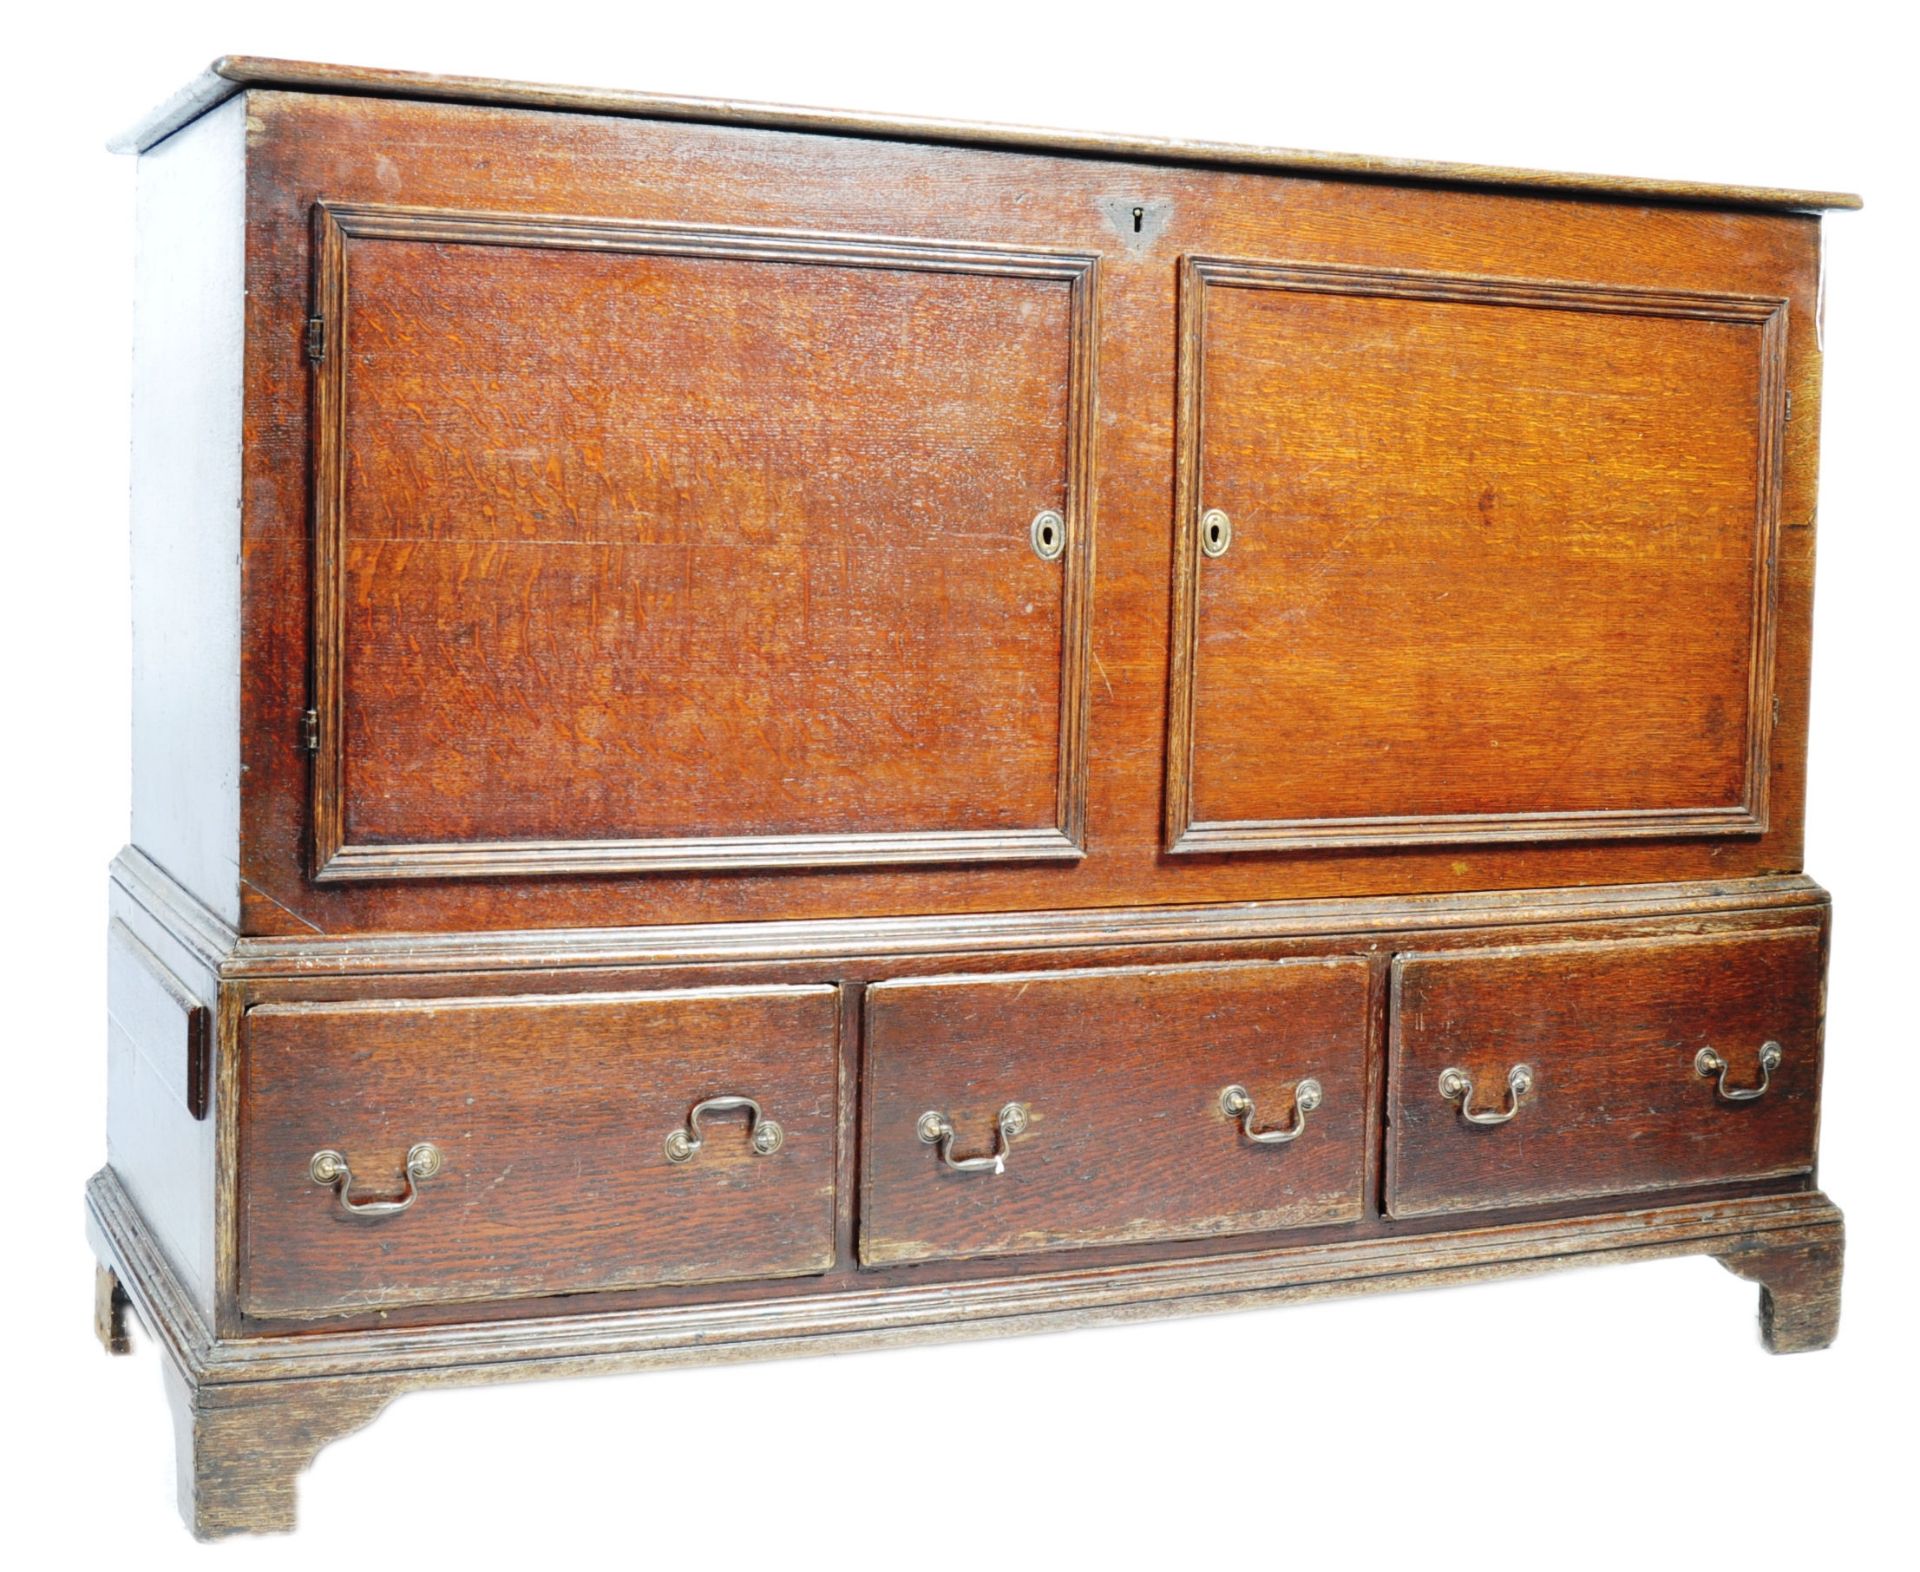 18TH CENTURY GEORGIAN ENGLISH MULE CHEST ON STAND